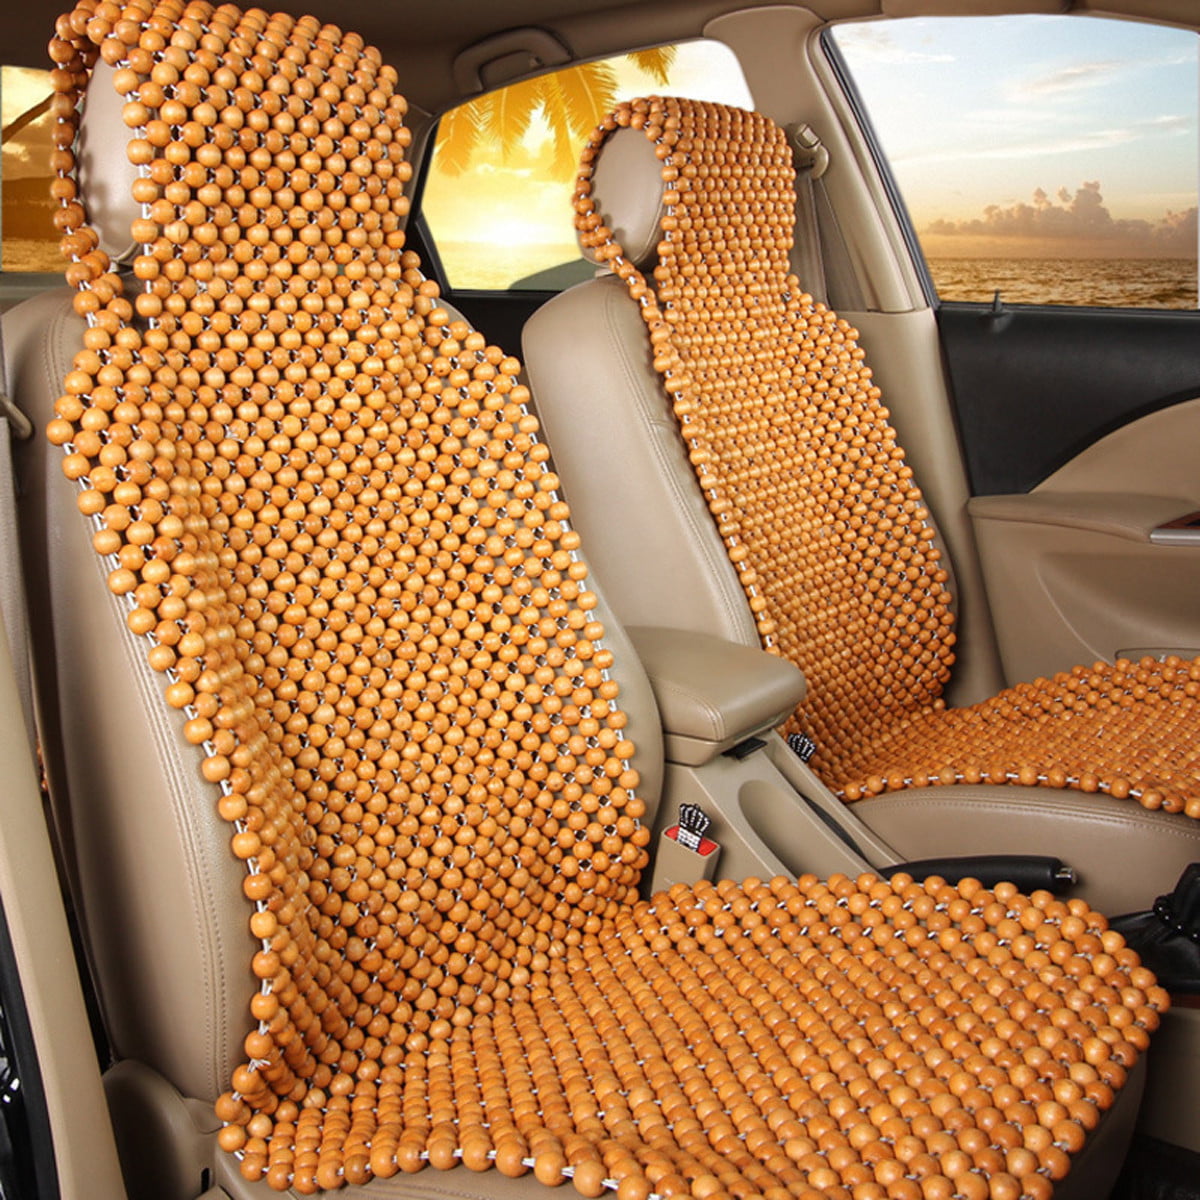 IMIKEYA Natural Wood Beaded Seat Cover Massaging Cool Cushion for Car Truck Keeps The Back from Getting Sweaty While Driving Coffee Makes Driving More Bearable and Less Painful On Long Trips 